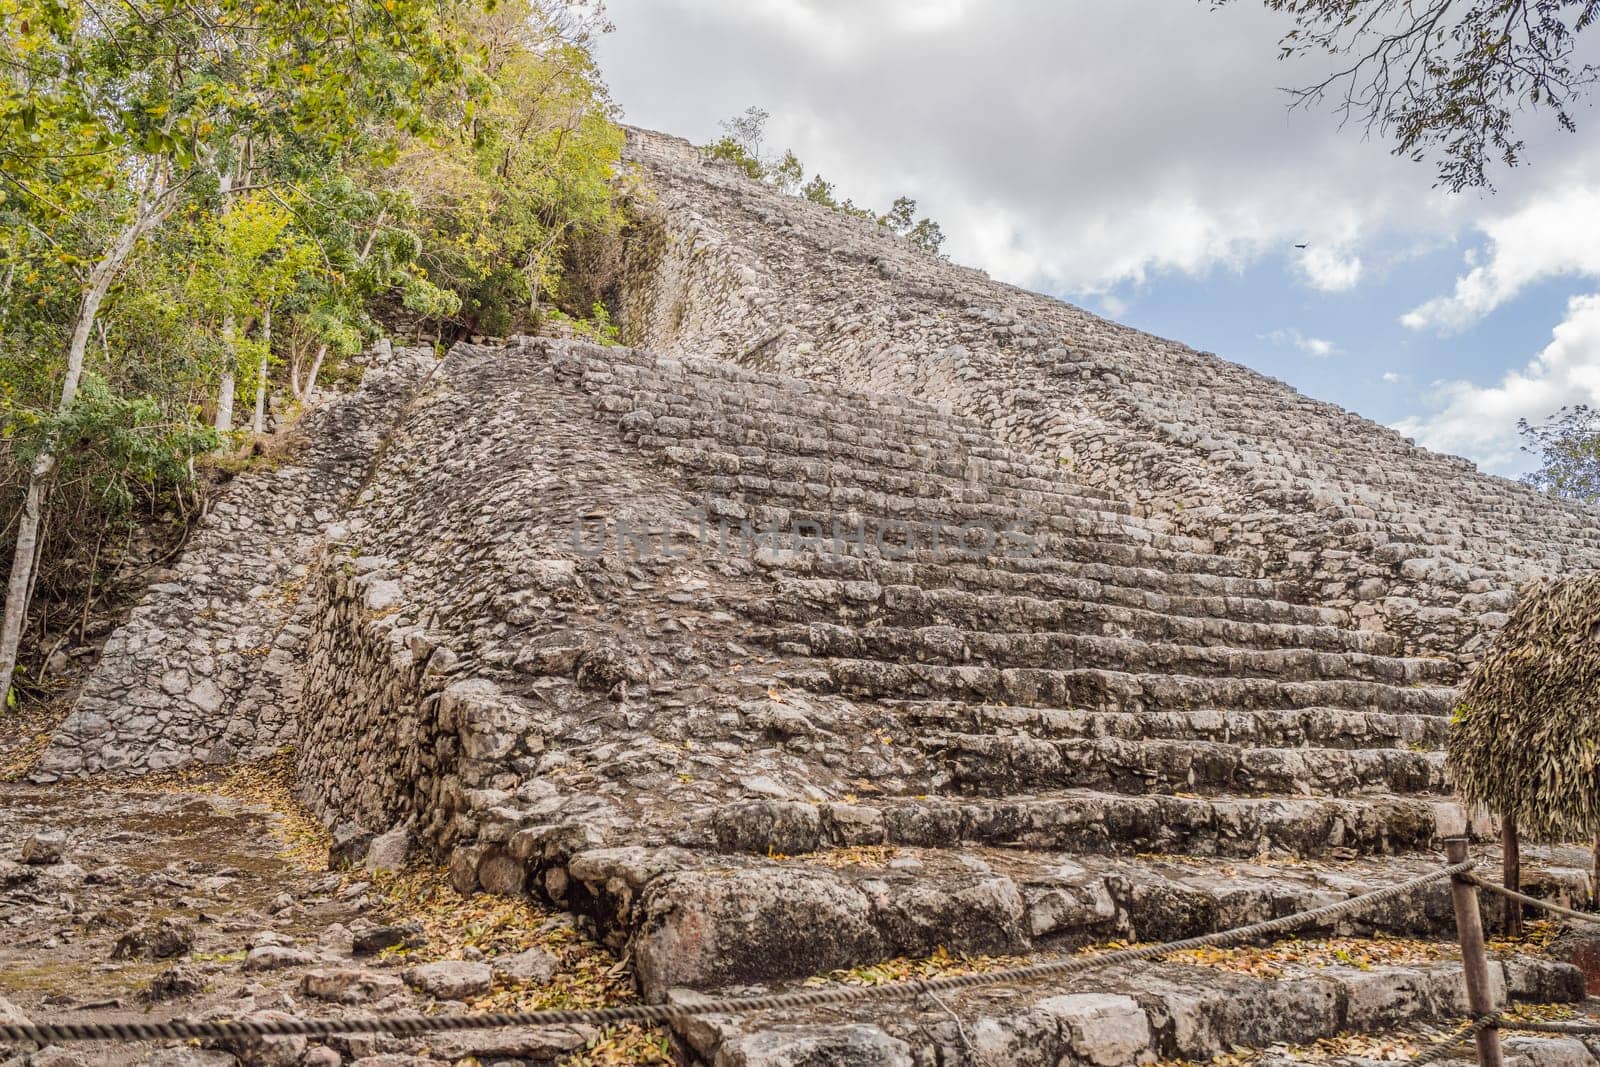 Coba, Mexico. Ancient mayan city in Mexico. Coba is an archaeological area and a famous landmark of Yucatan Peninsula. Cloudy sky over a pyramid in Mexico by galitskaya